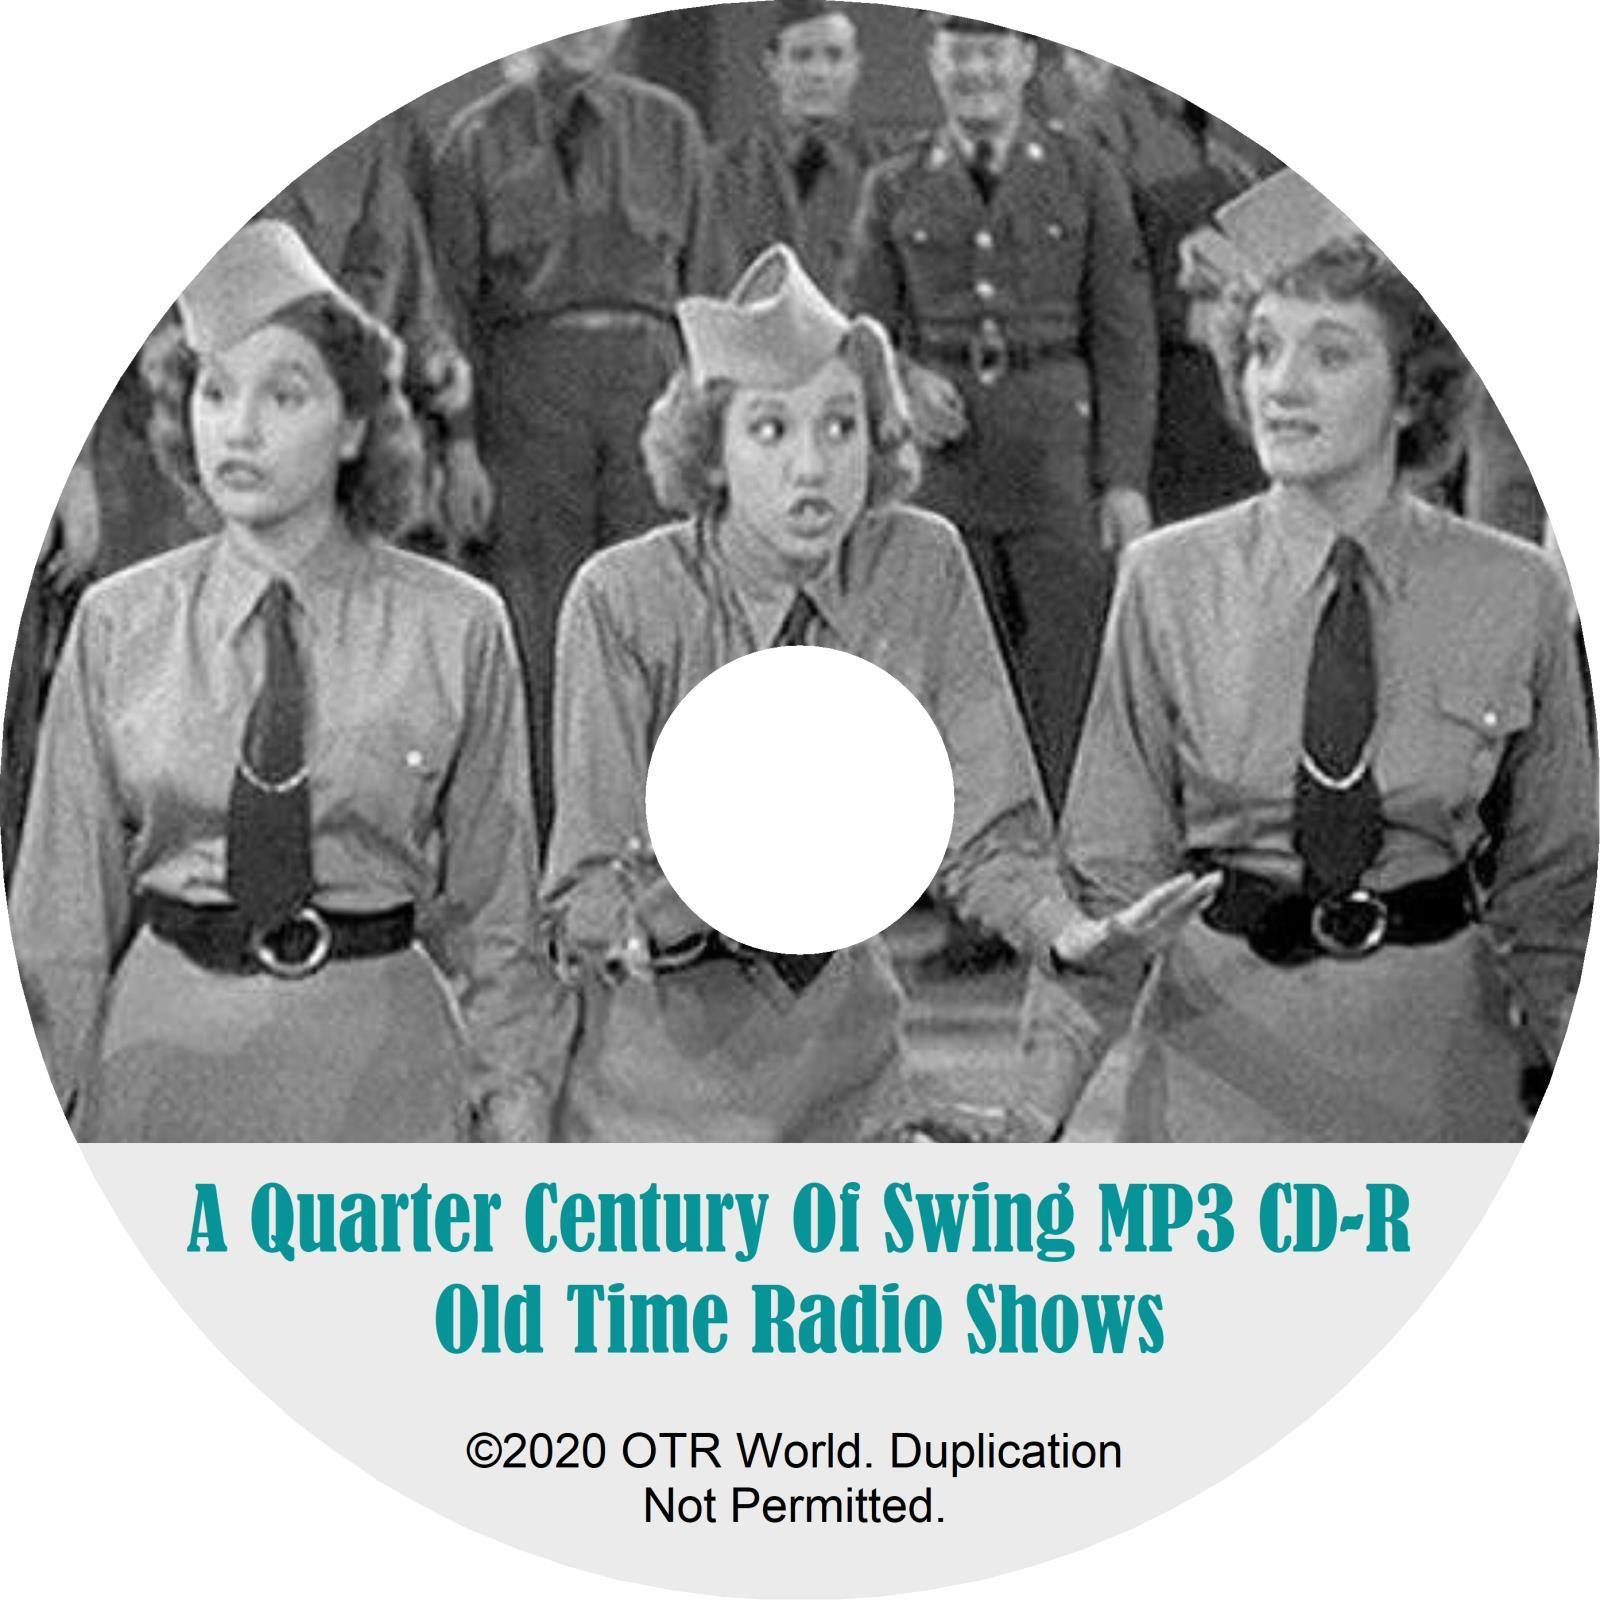 A Quarter Century Of Swing OTR Old Time Radio Shows MP3 On CD-R 10 Episodes - OTR World